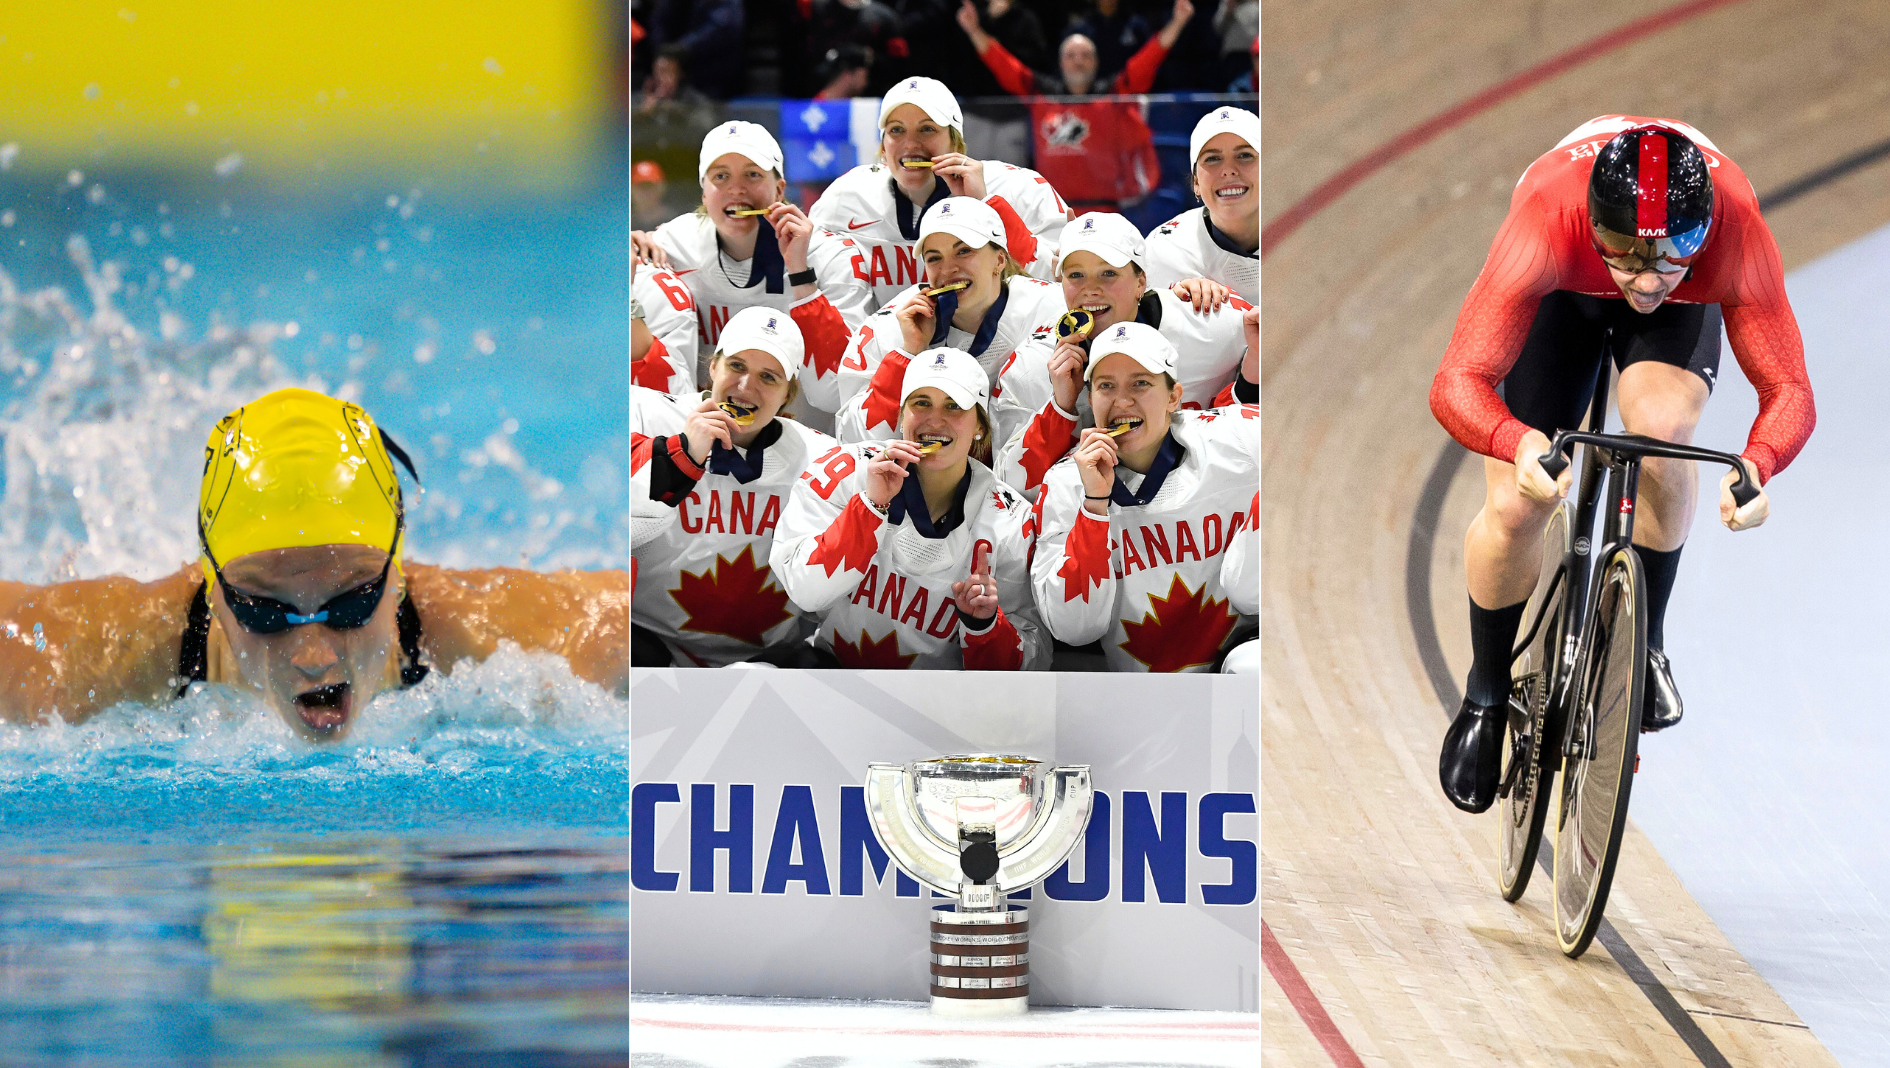 Weekend Roundup: Team Canada are world champions in women’s hockey,
track cyclists triumph at home